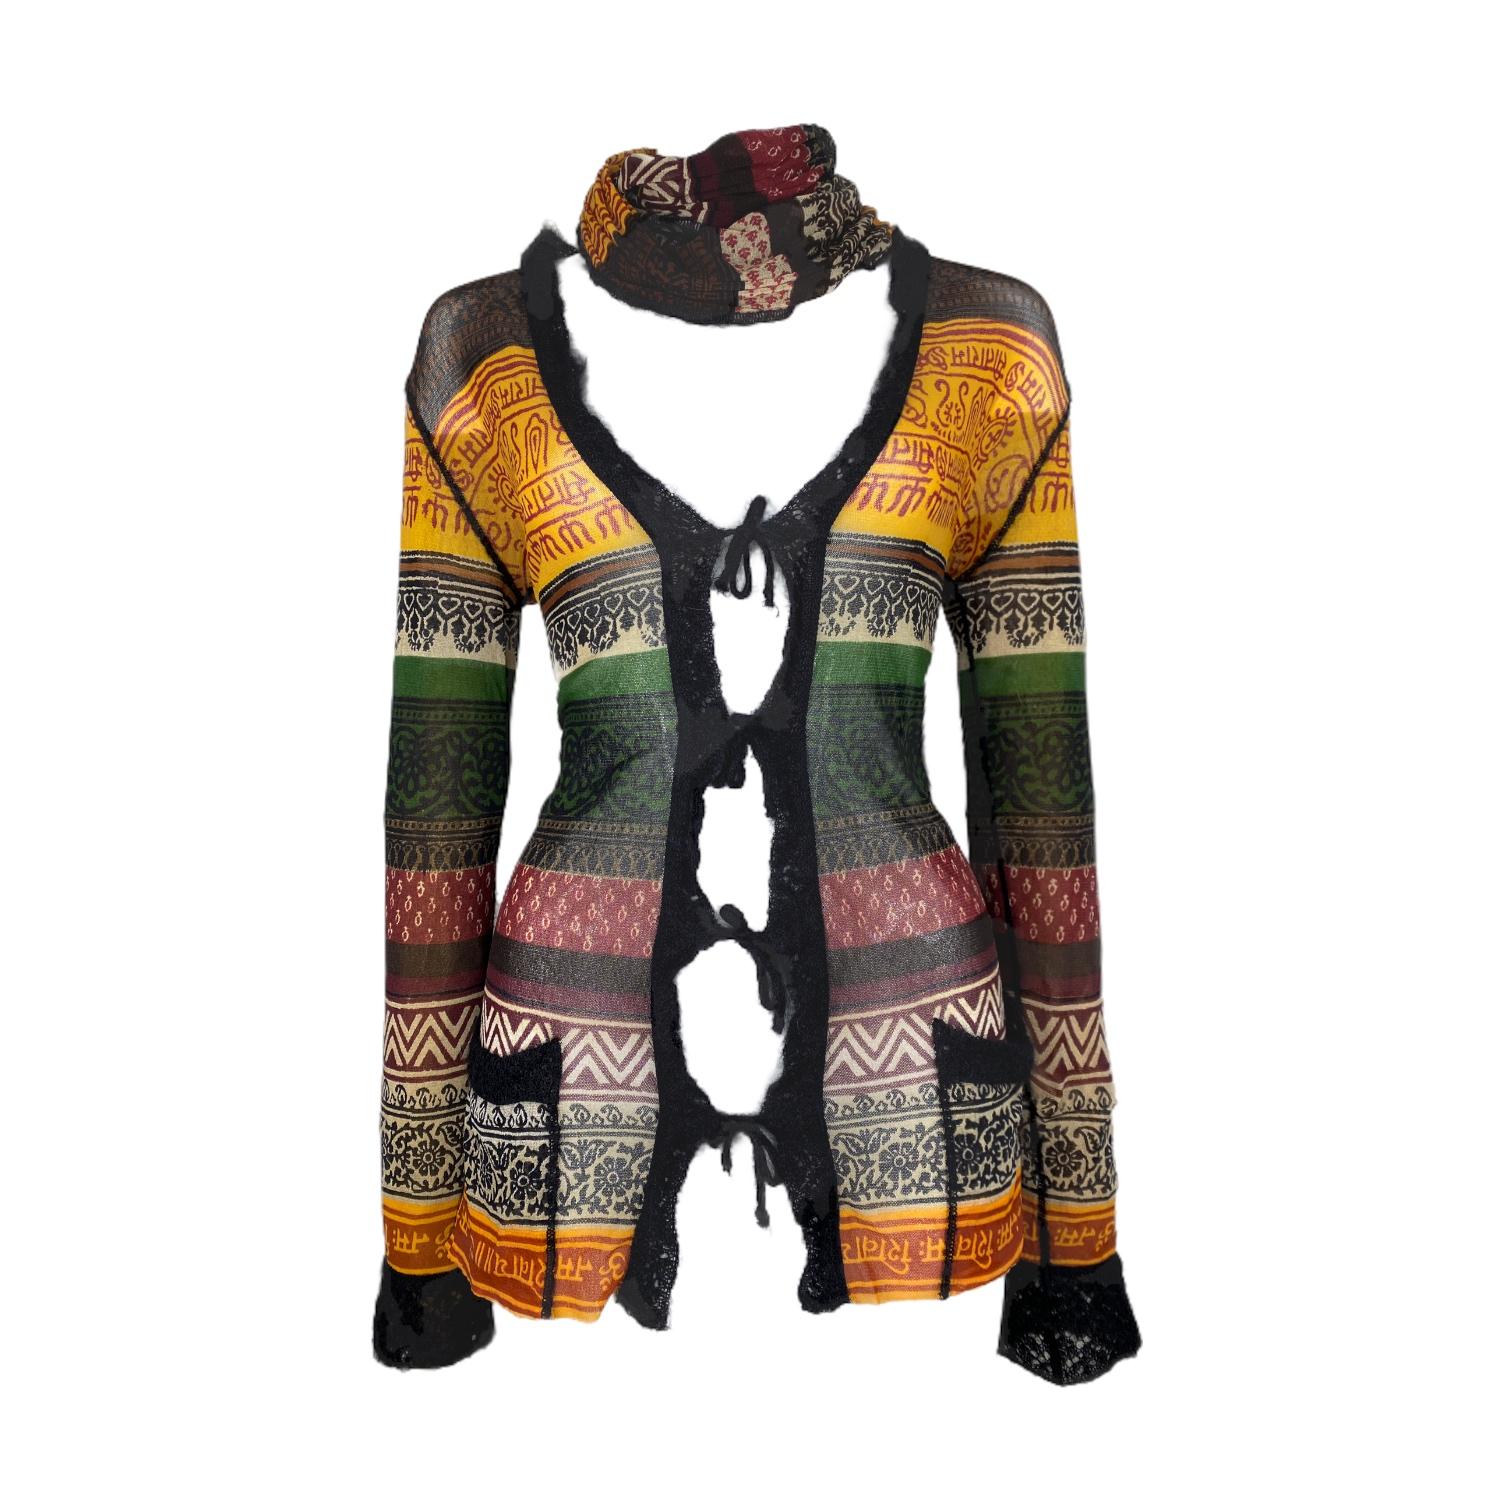 Jean Paul Gaultier Classique Vintage Tribal Print Mesh Top

1990s

Iconic Print 

Lightweight Stretchy Mesh Material 

Features scarf detail, and tie front Cardigan.

100% Authentic

CONDITION: This item is a vintage/pre-worn piece so some signs of